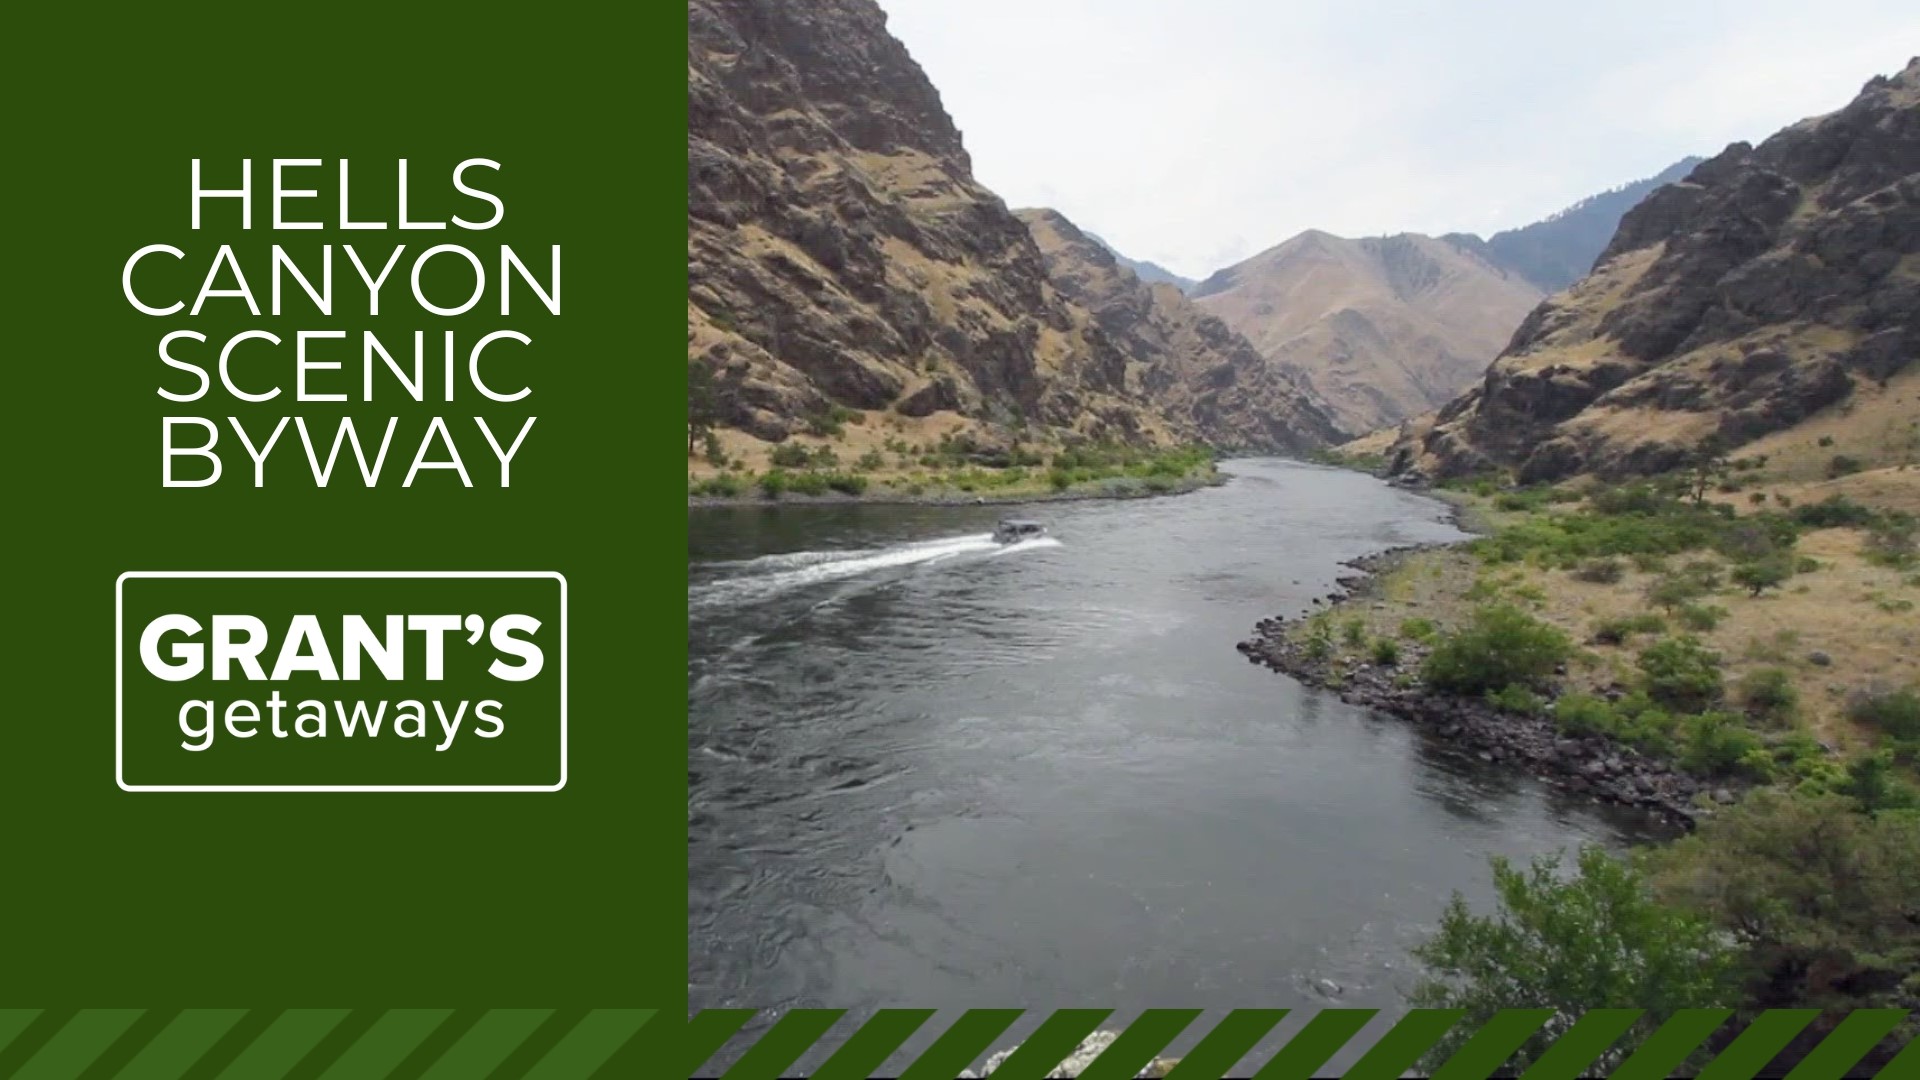 The Hells Canyon Scenic Byway on the Oregon-Idaho border takes you to the top of the deepest gorge in the U.S. The area is rich in history.